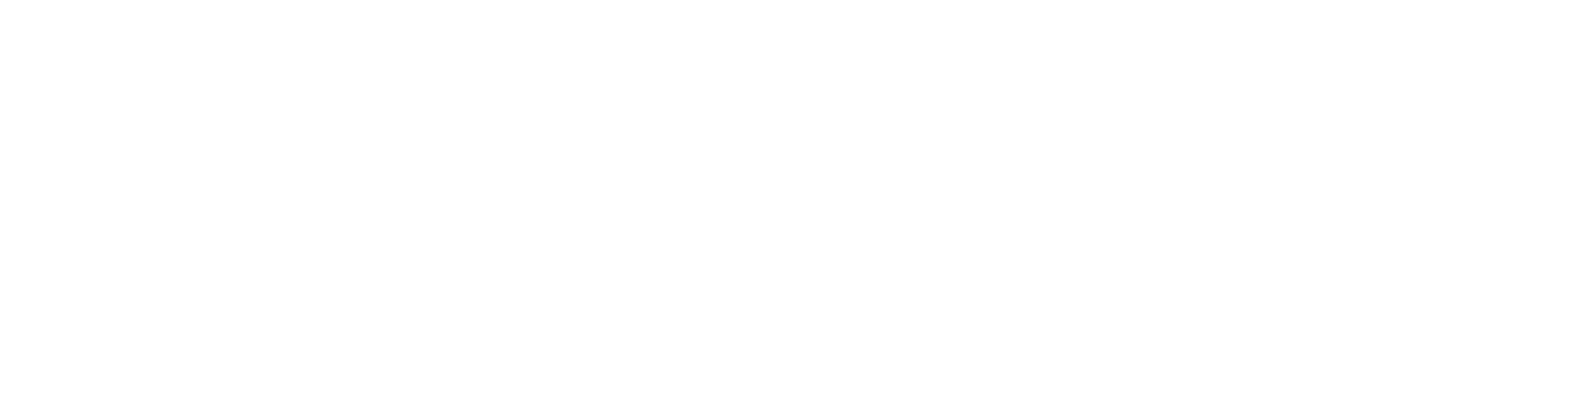 Four Point Construction - Minneapolis trusted roofers